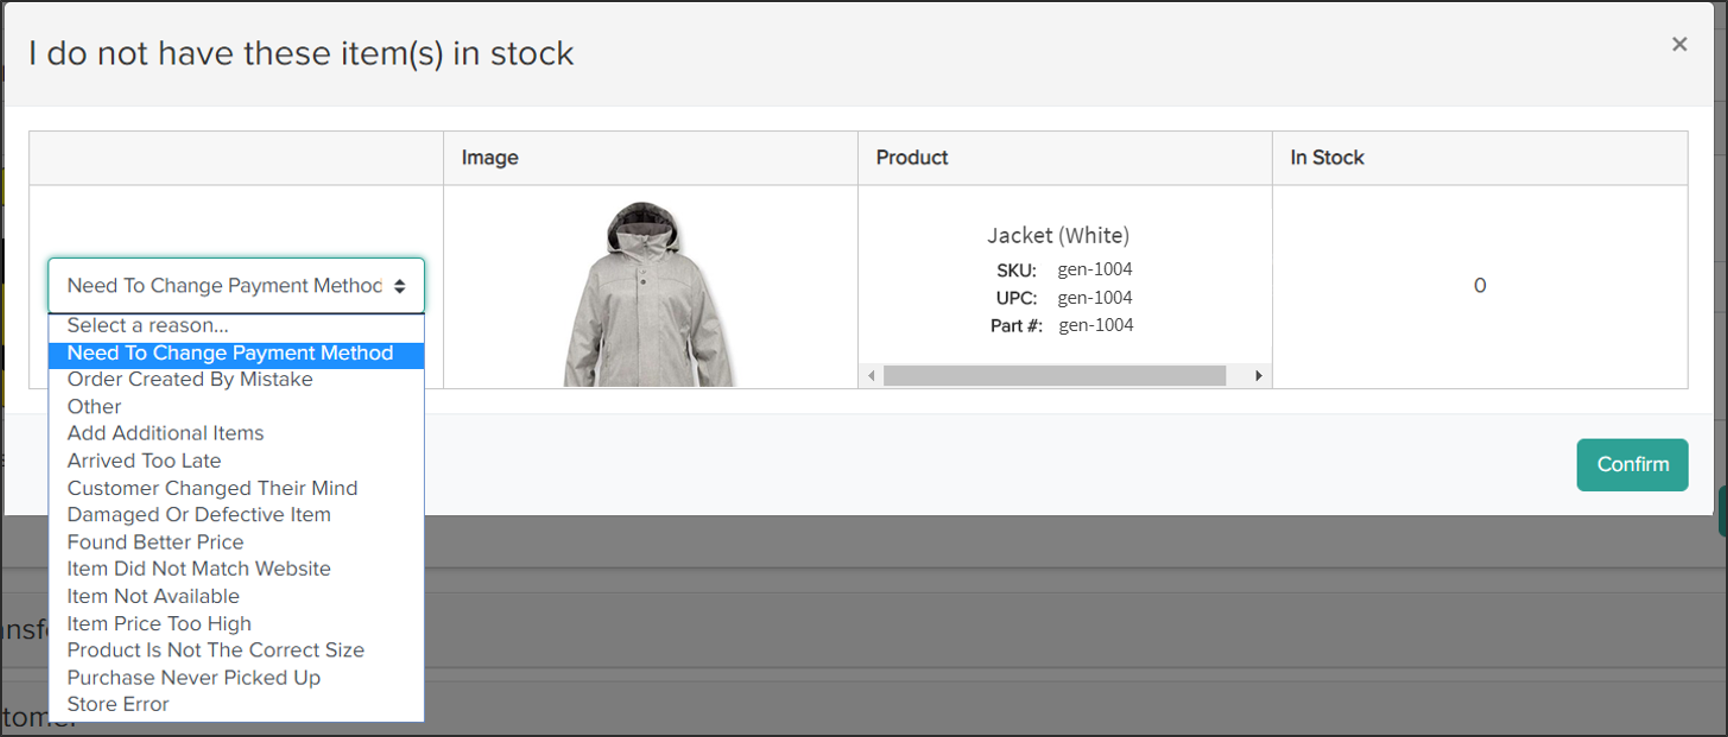 Pop-up for items that are not in stock showing the drop-down menu with reason options